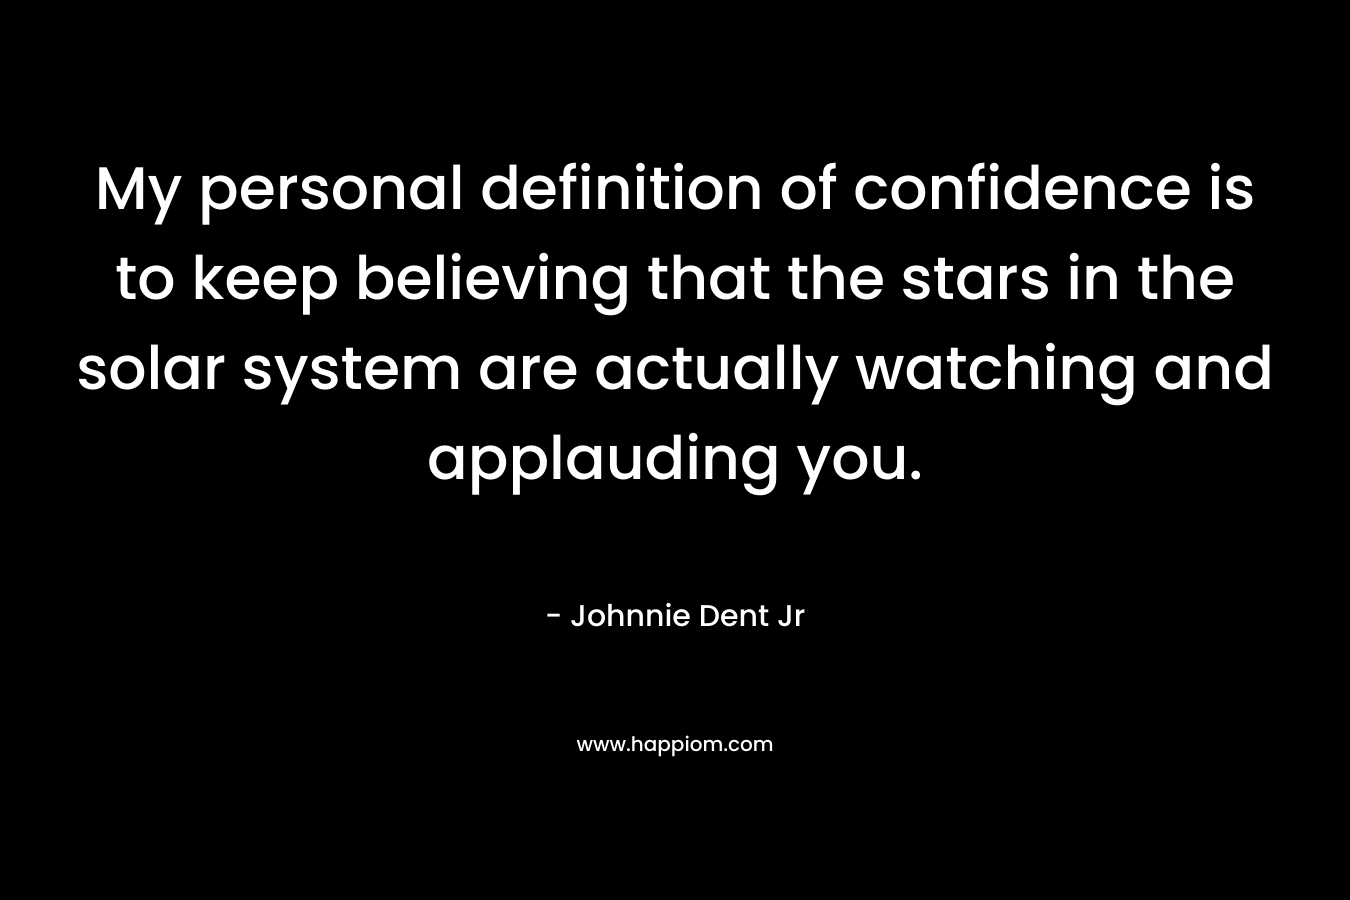 My personal definition of confidence is to keep believing that the stars in the solar system are actually watching and applauding you.